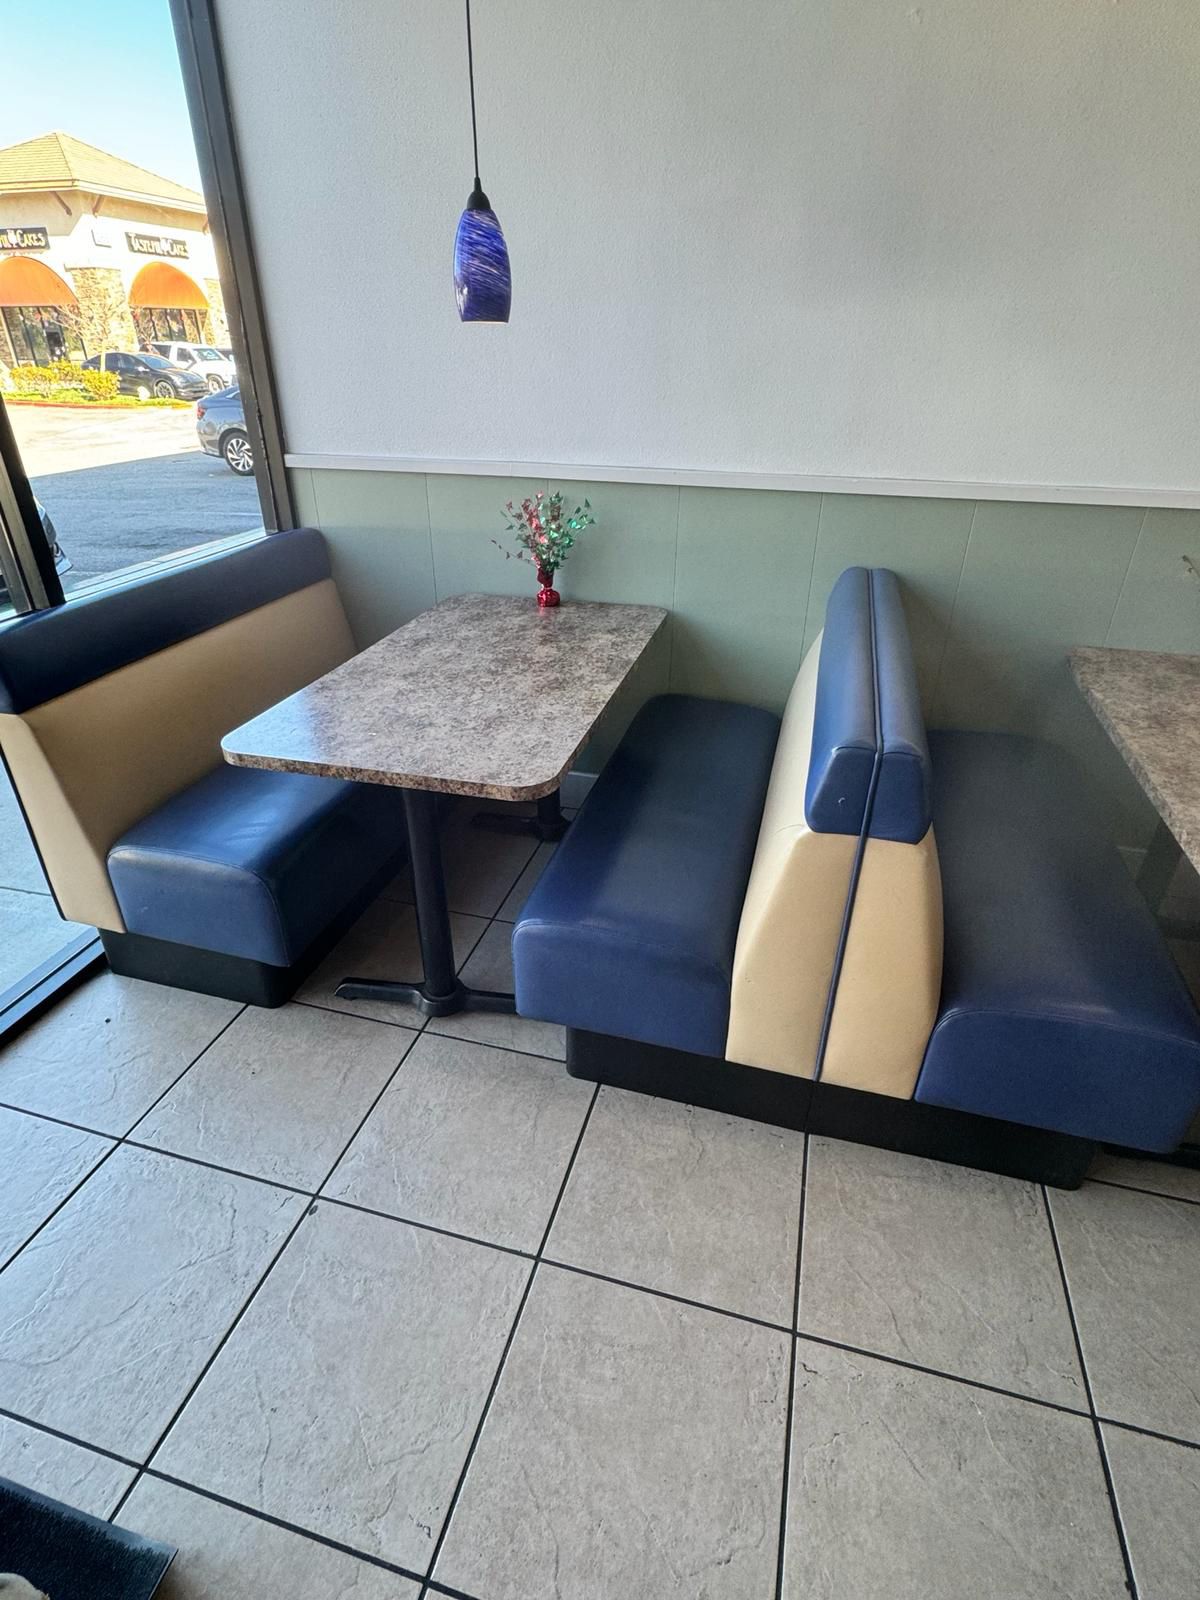 Restaurant Benches And Table For Sale 